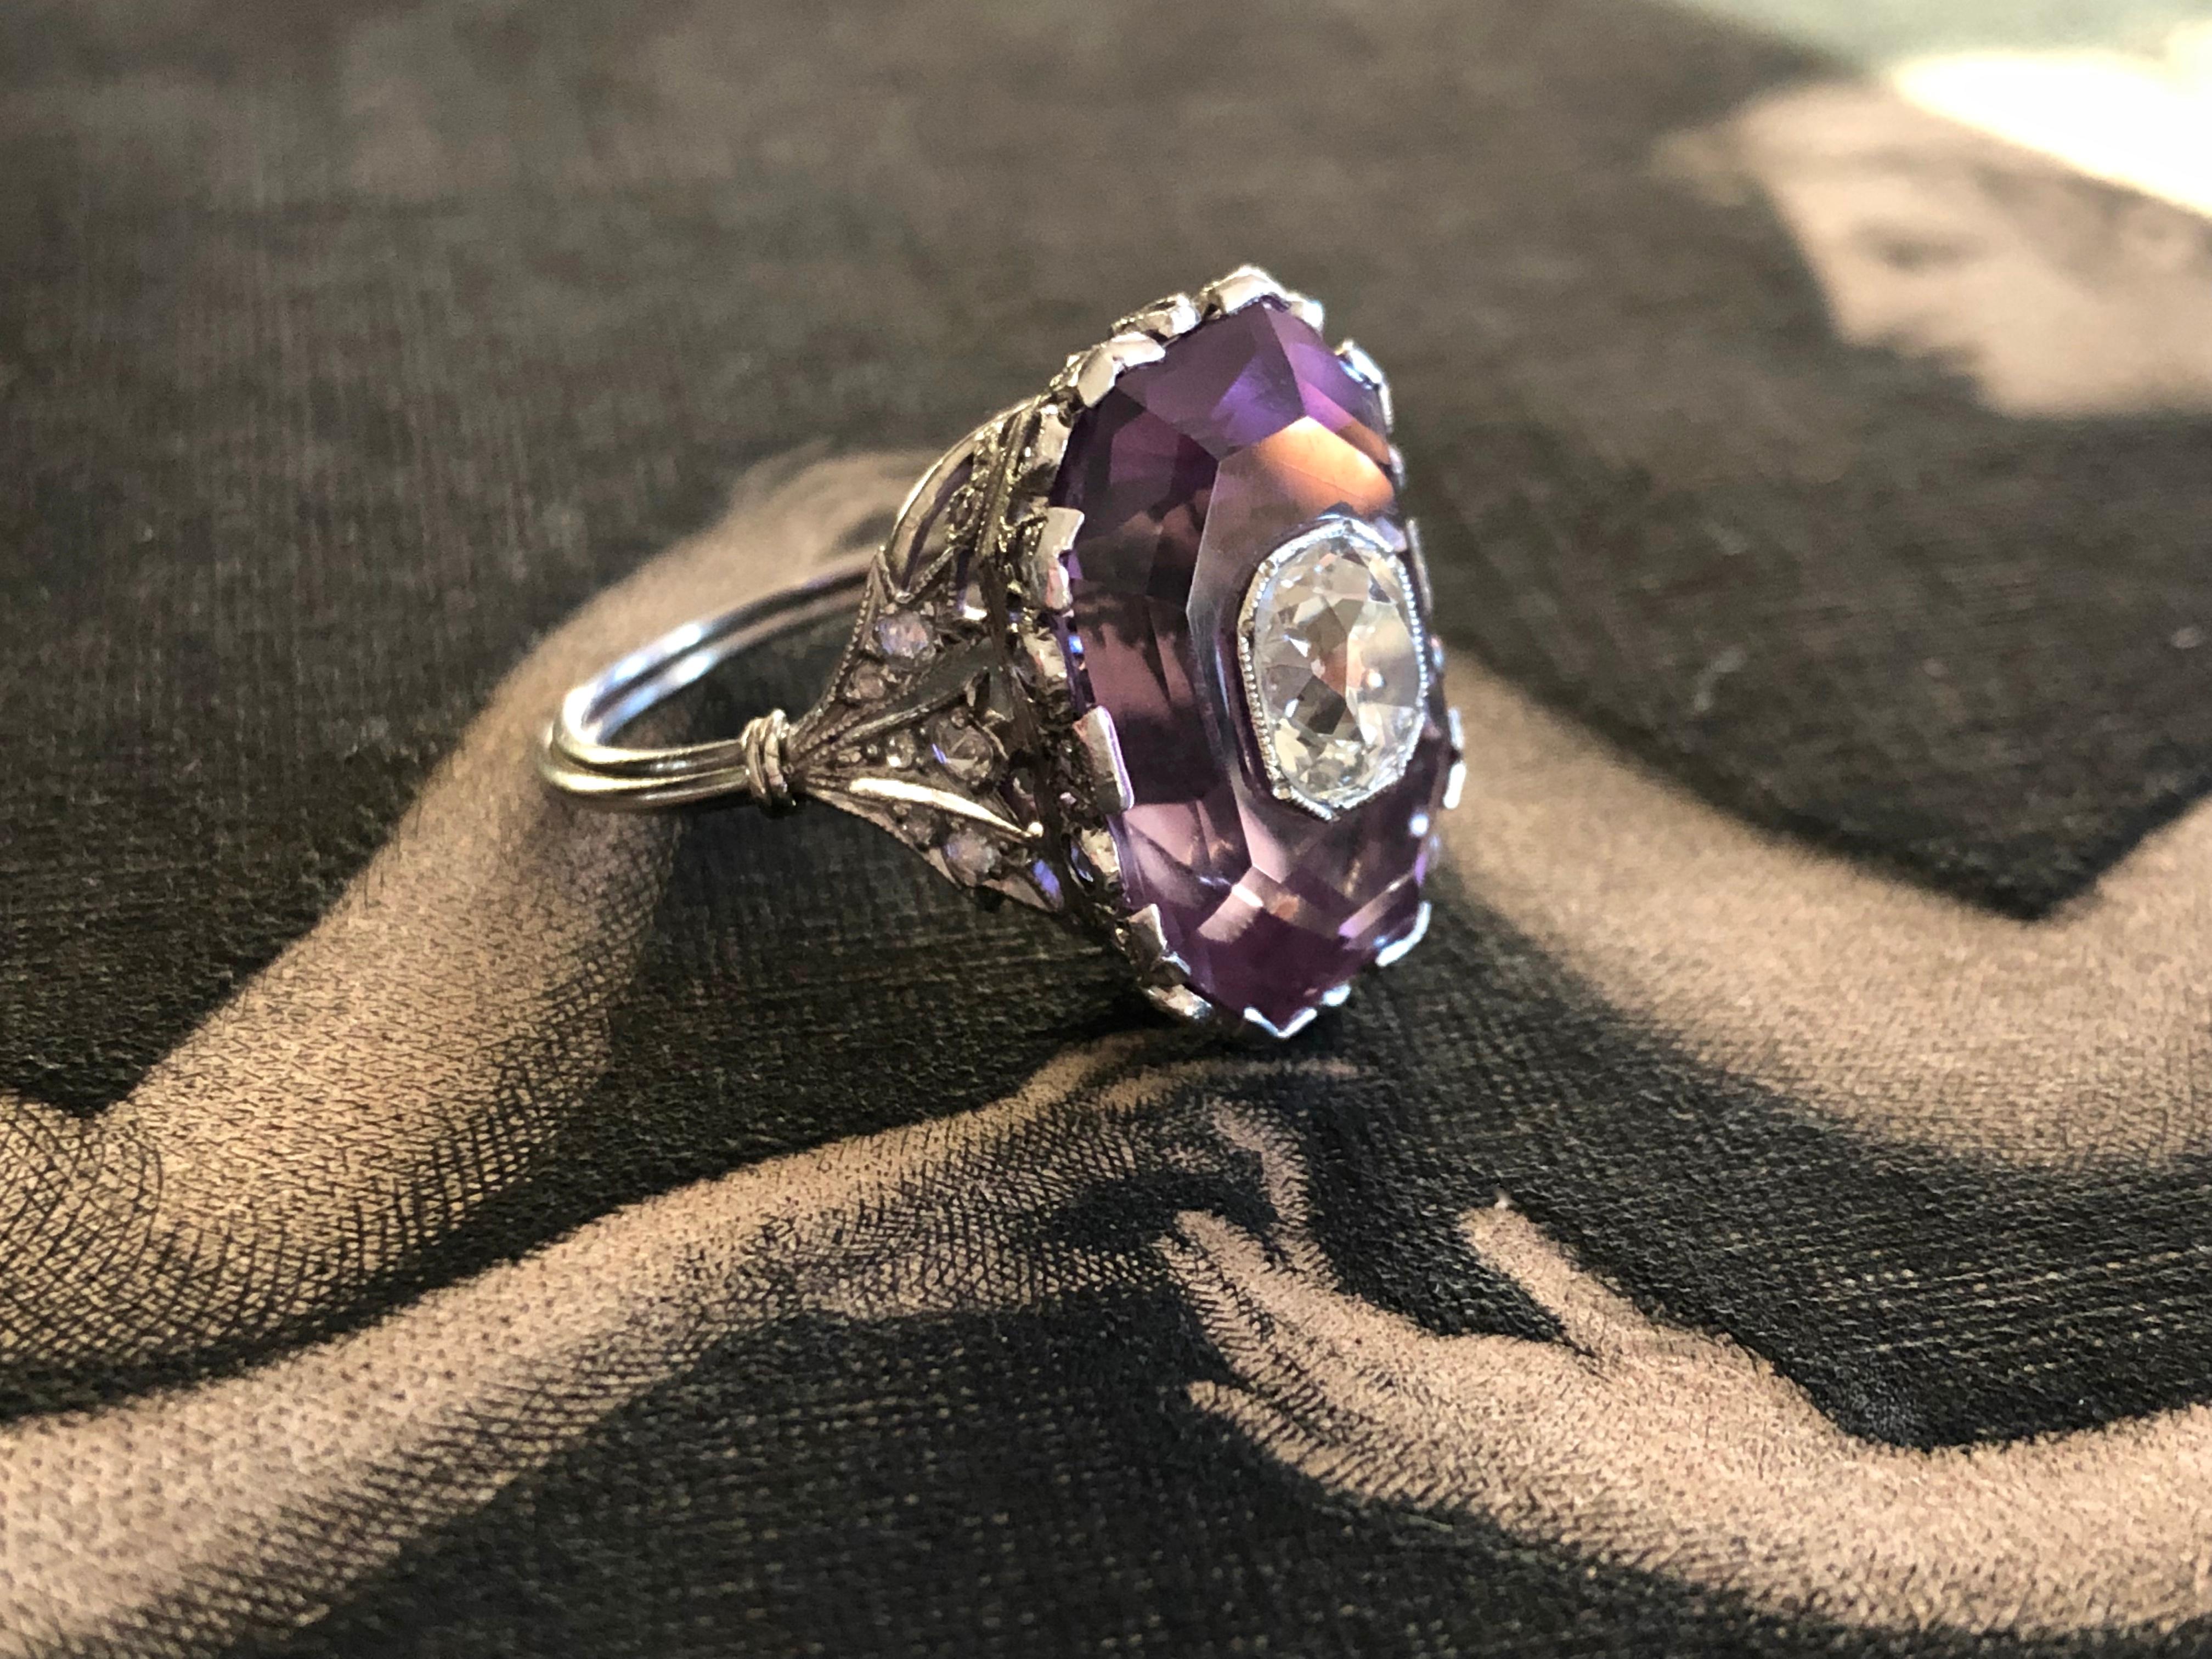 Exquisite in every way, this French Belle Epoque ring centers on 1.03 carat old mine cut diamond, bezel set and seated within an octagonal step cut amethyst. The mounting is like a tiny crown, delicately detailed with lacy openwork and twinkling